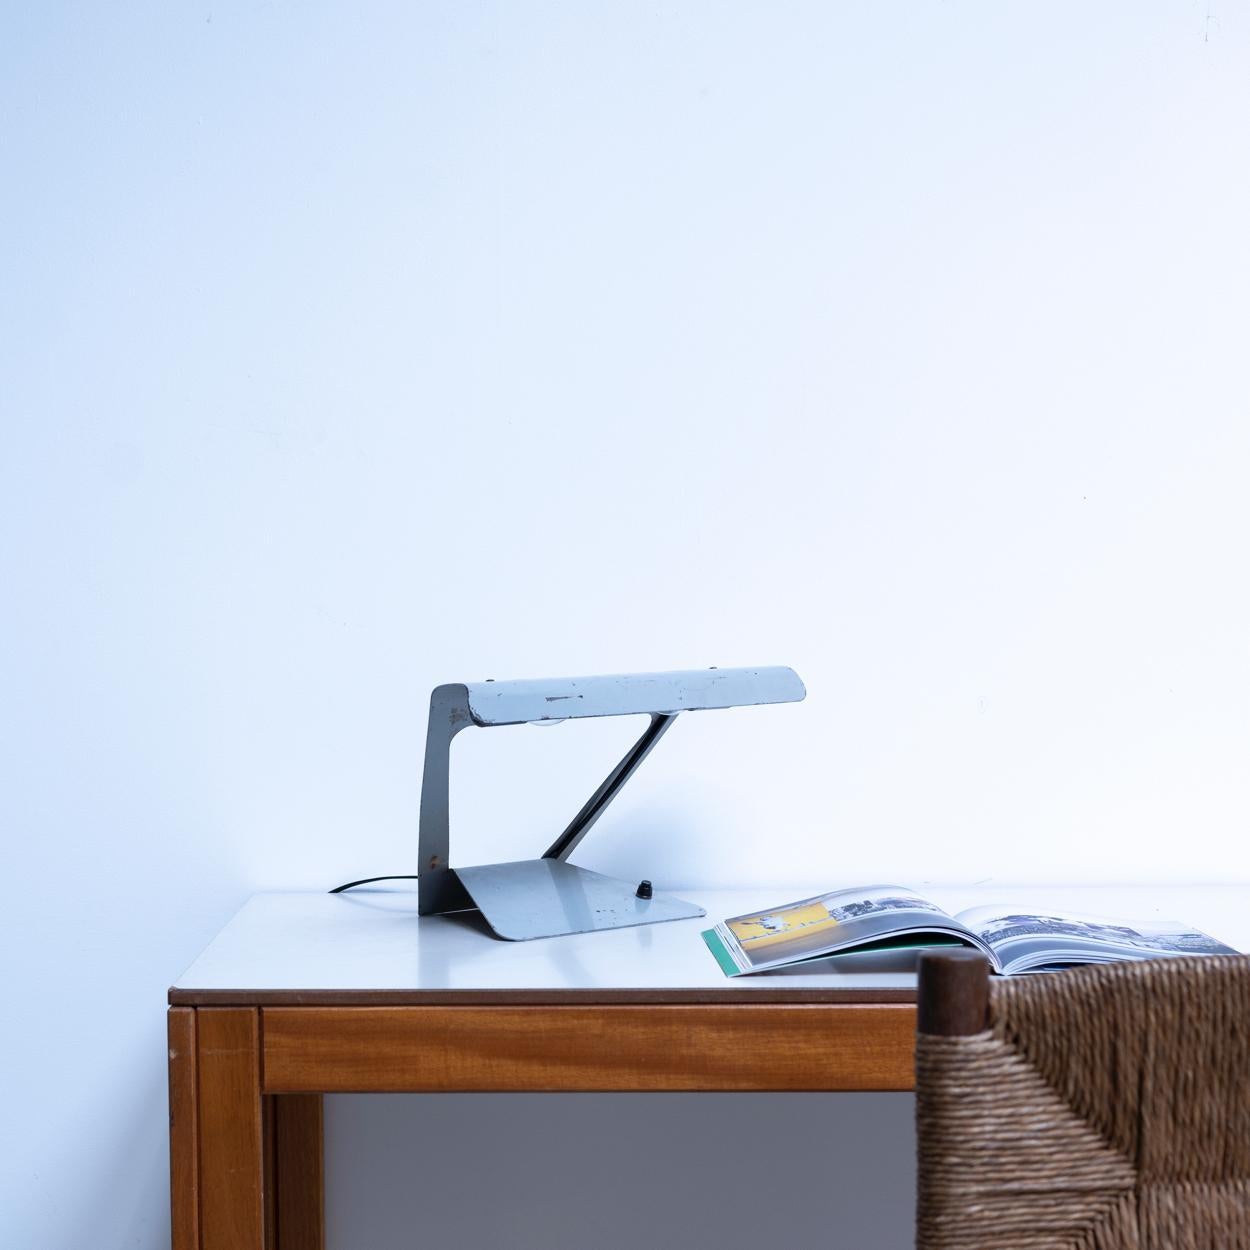 Desk lamp designed by Charlotte Perriand for Philips. Made by cutting and folding a single steel plate.
Fully rewired with two E17 sockets and can be used practically.